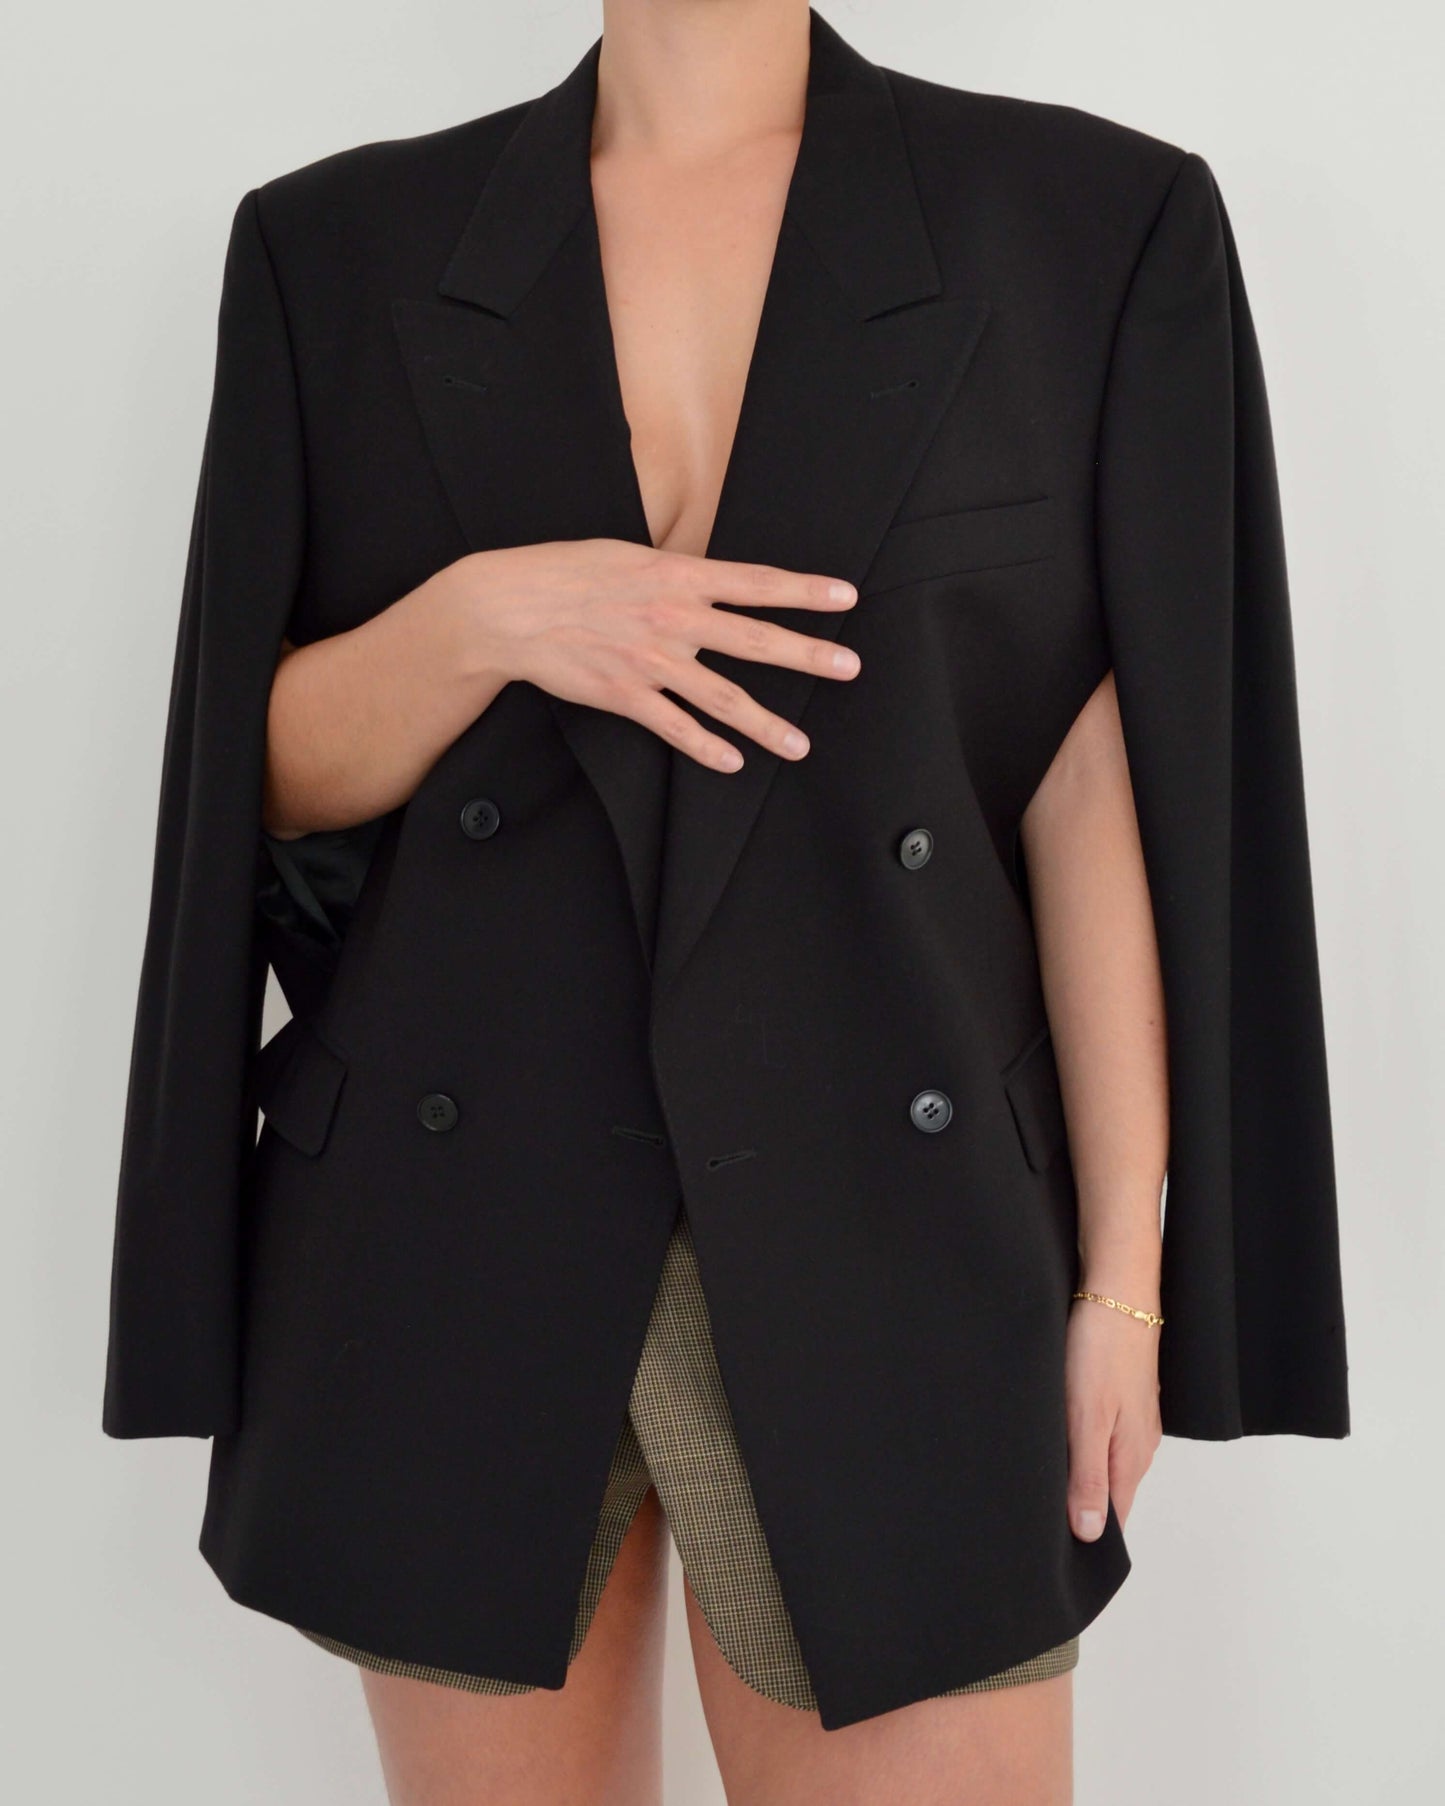 Classy Jacket - double breasted black (M/L)